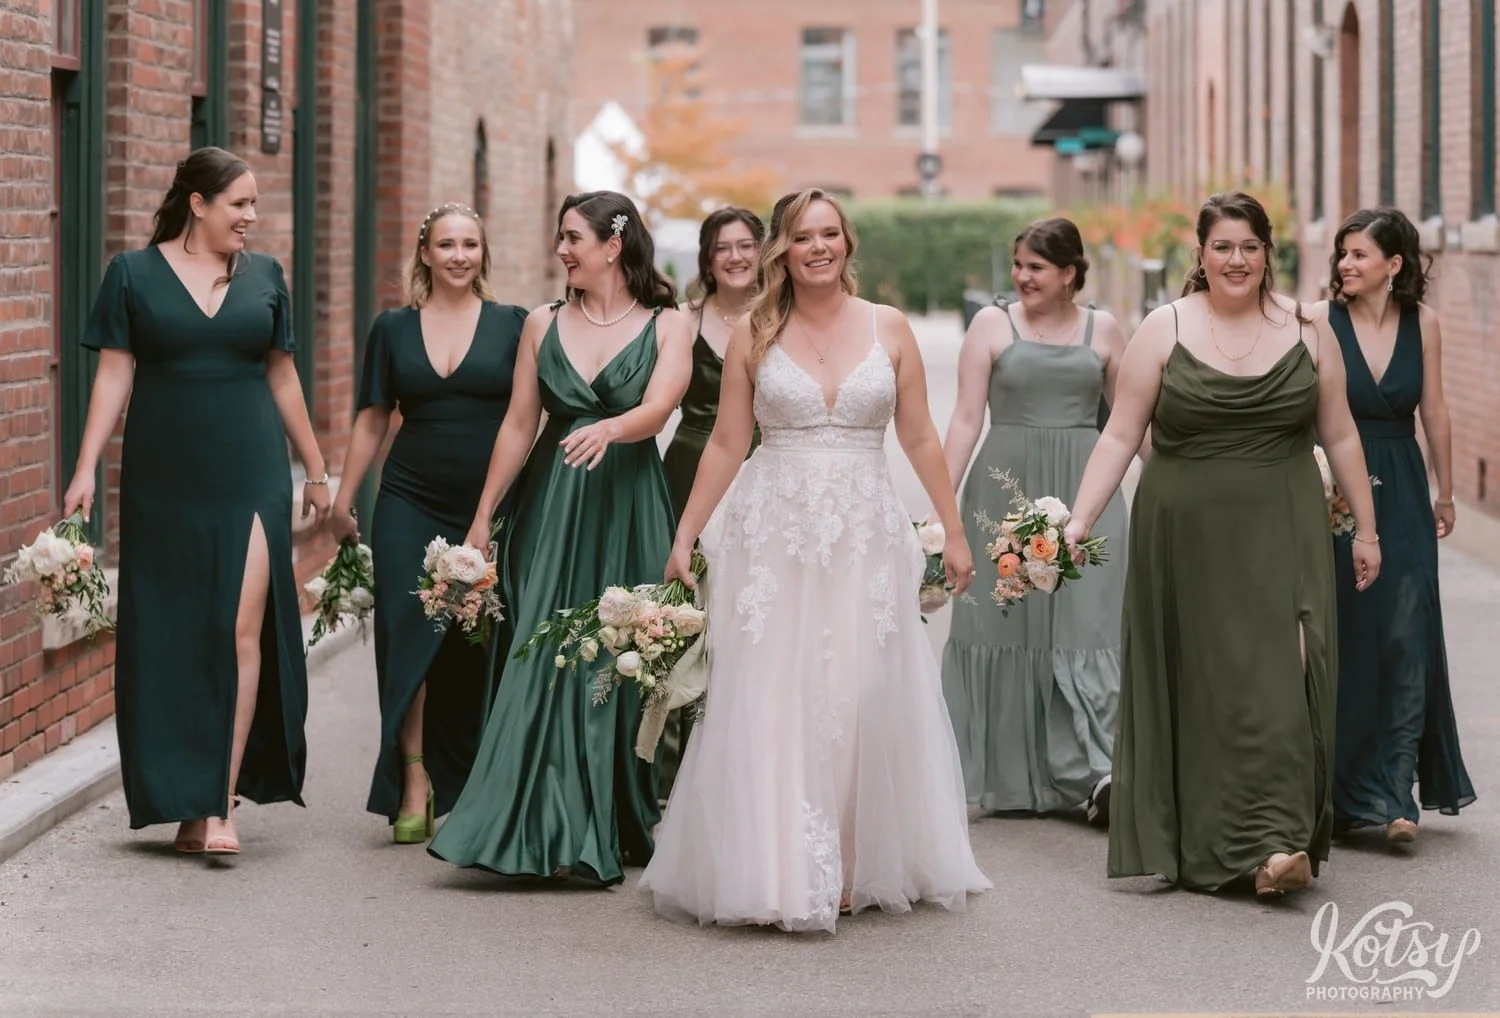 A bride wearing a white bridal gown and holding a flower bouquet walks with her bridesmaids wearing green dresses in between buildings at the carpet factory in Toronto Canada